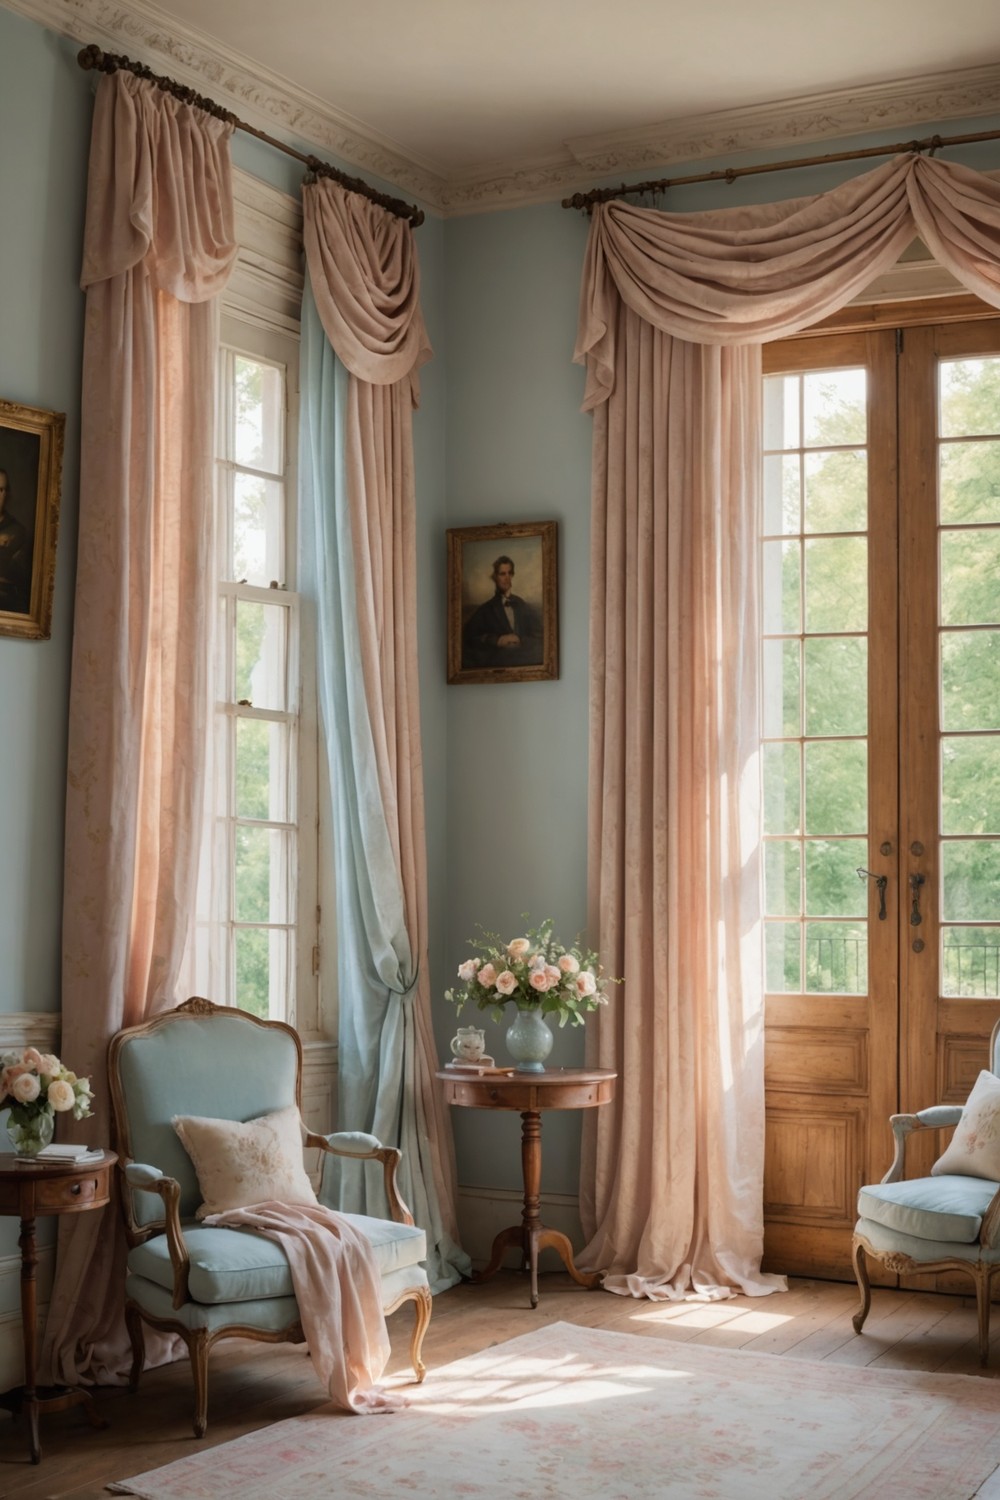 Soft Billowy Curtains in Pastel Shades